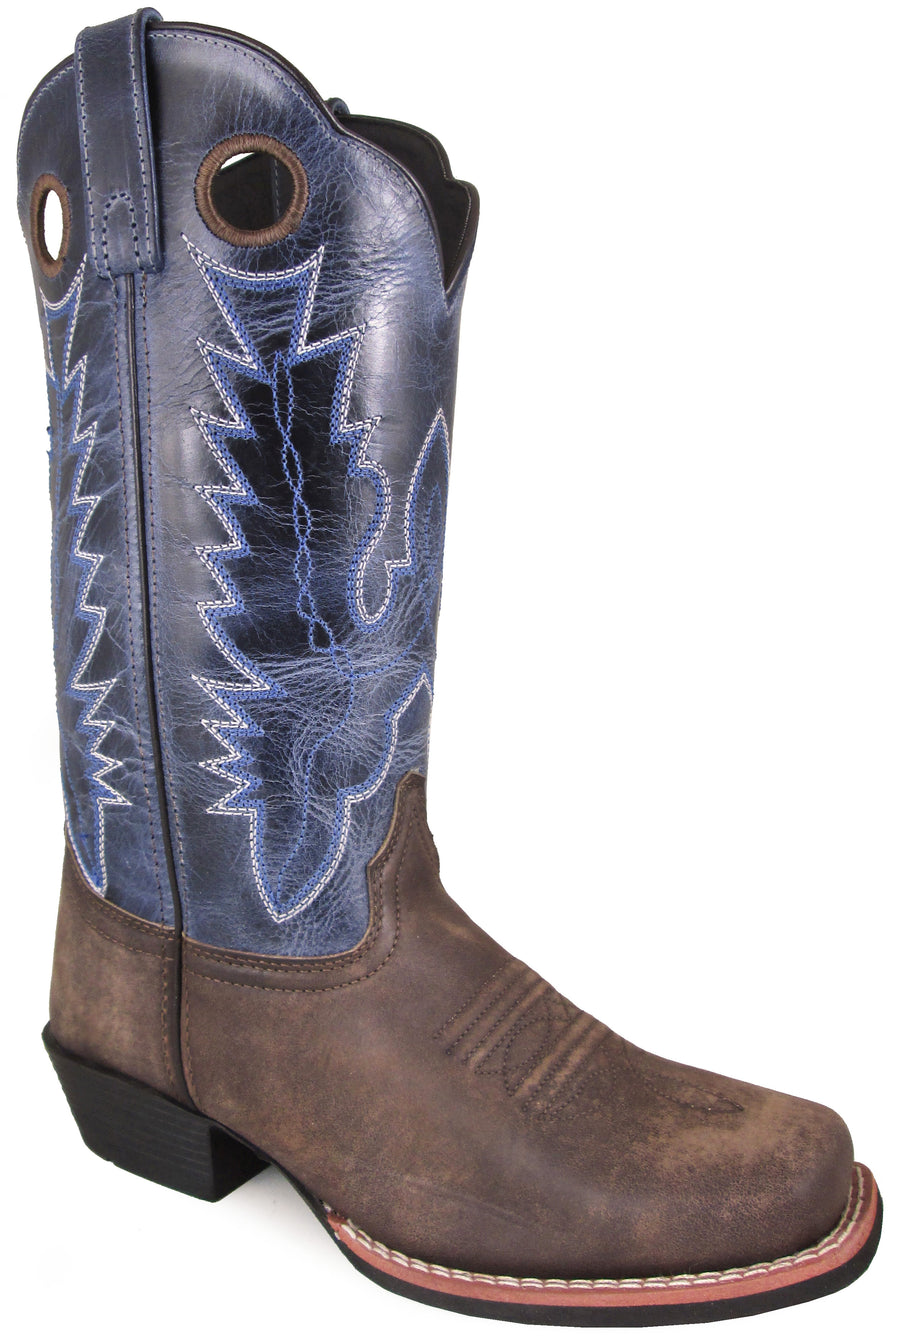 Smoky Mountain Women's Mesa Square Toe Pull On Brown Oil Distressed/Navy Crackle Boots